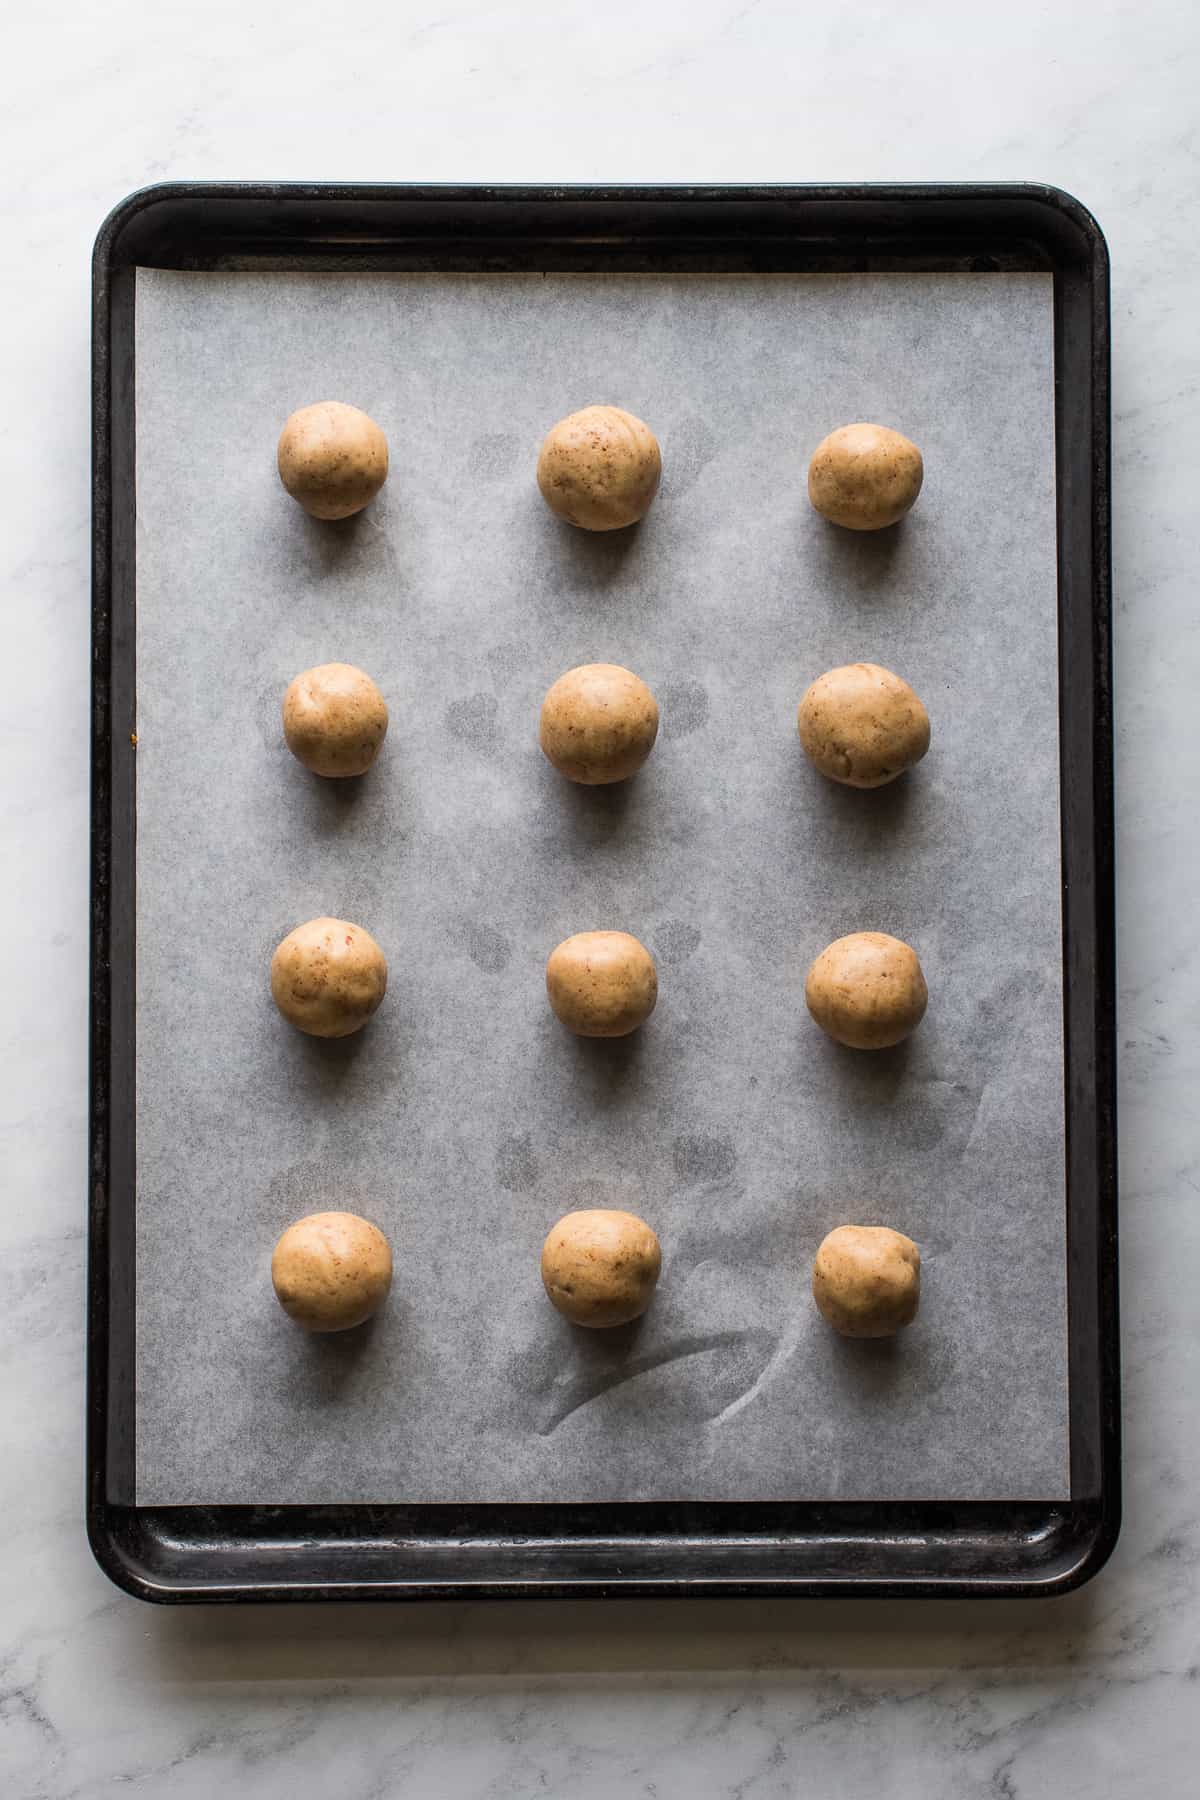 Unbaked Mexican Wedding Cookies on a baking sheet.